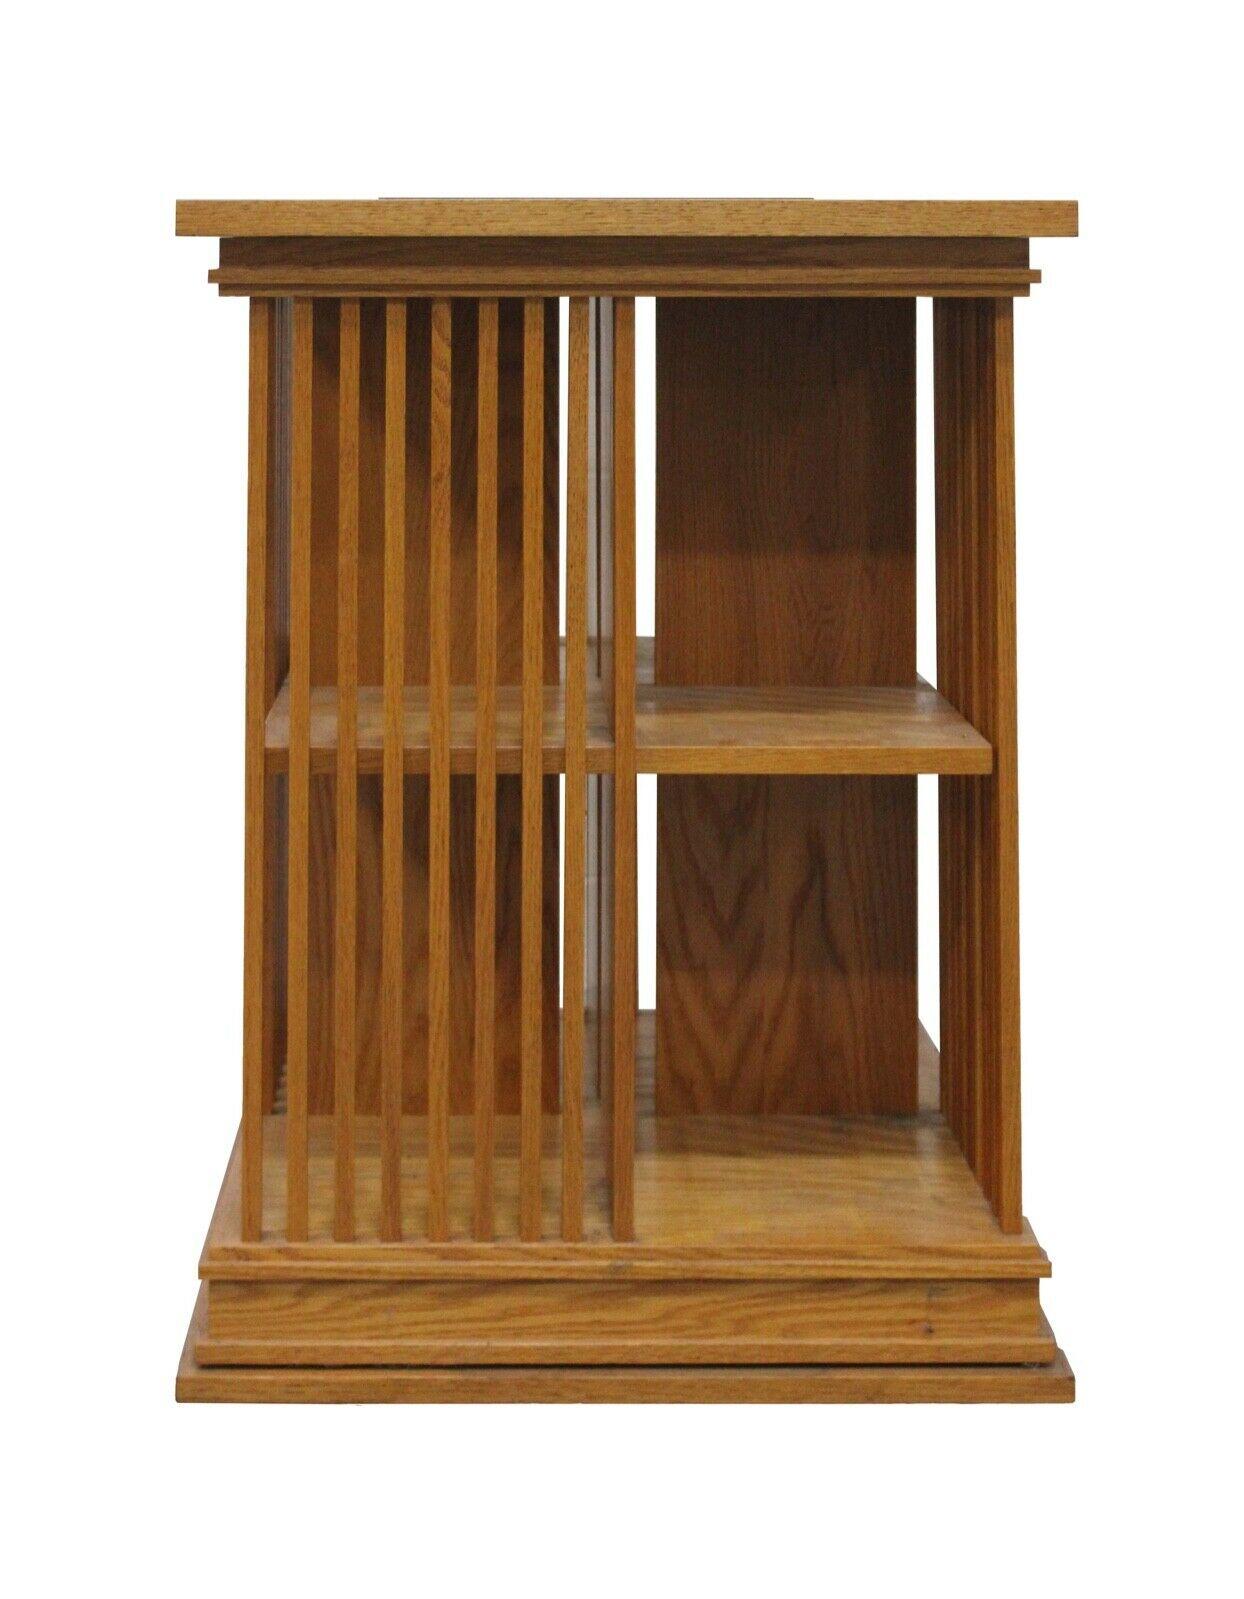 For your consideration is this stunning vintage, functional and artistic rotating bookcase in the style of Frank Lloyd Wright. Dimensions: 23 W x 23 D x 30.5 H.
 